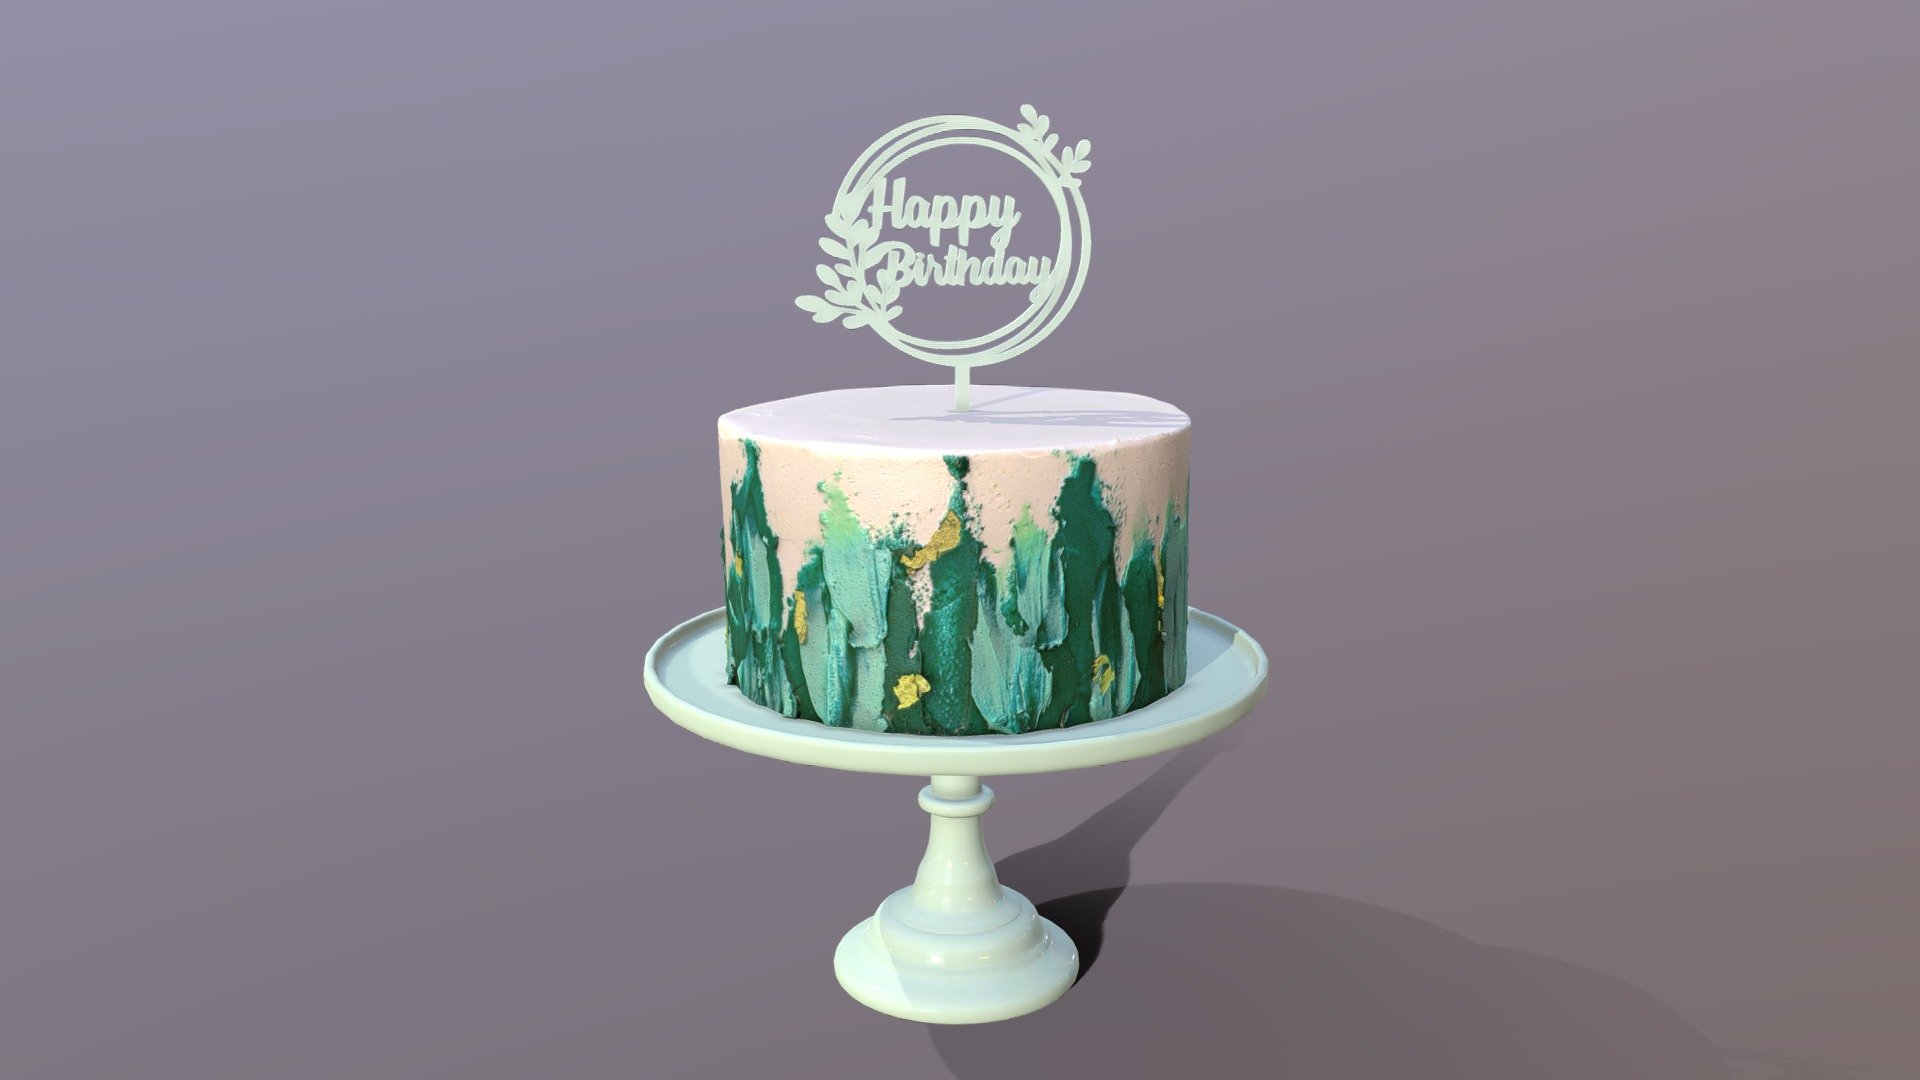 3D scan of an elegant Turquoise Buttercream Birthday Cake on the Mosser glass stand which is made by CAKESBURG Online Premium Cake Shop in UK. You can also order real cake from this link: https://cakesburg.co.uk/products/luxury-green-buttercream-cake?_pos=1&amp;_sid=4e0a66c21&amp;_ss=r

Textures 4096*4096px PBR photoscan-based materials Base Color, Normal, Roughness, Specular, AO) - Elegant Turquoise Buttercream Birthday Cake - Buy Royalty Free 3D model by Cakesburg Premium 3D Cake Shop (@Viscom_Cakesburg) 3d model